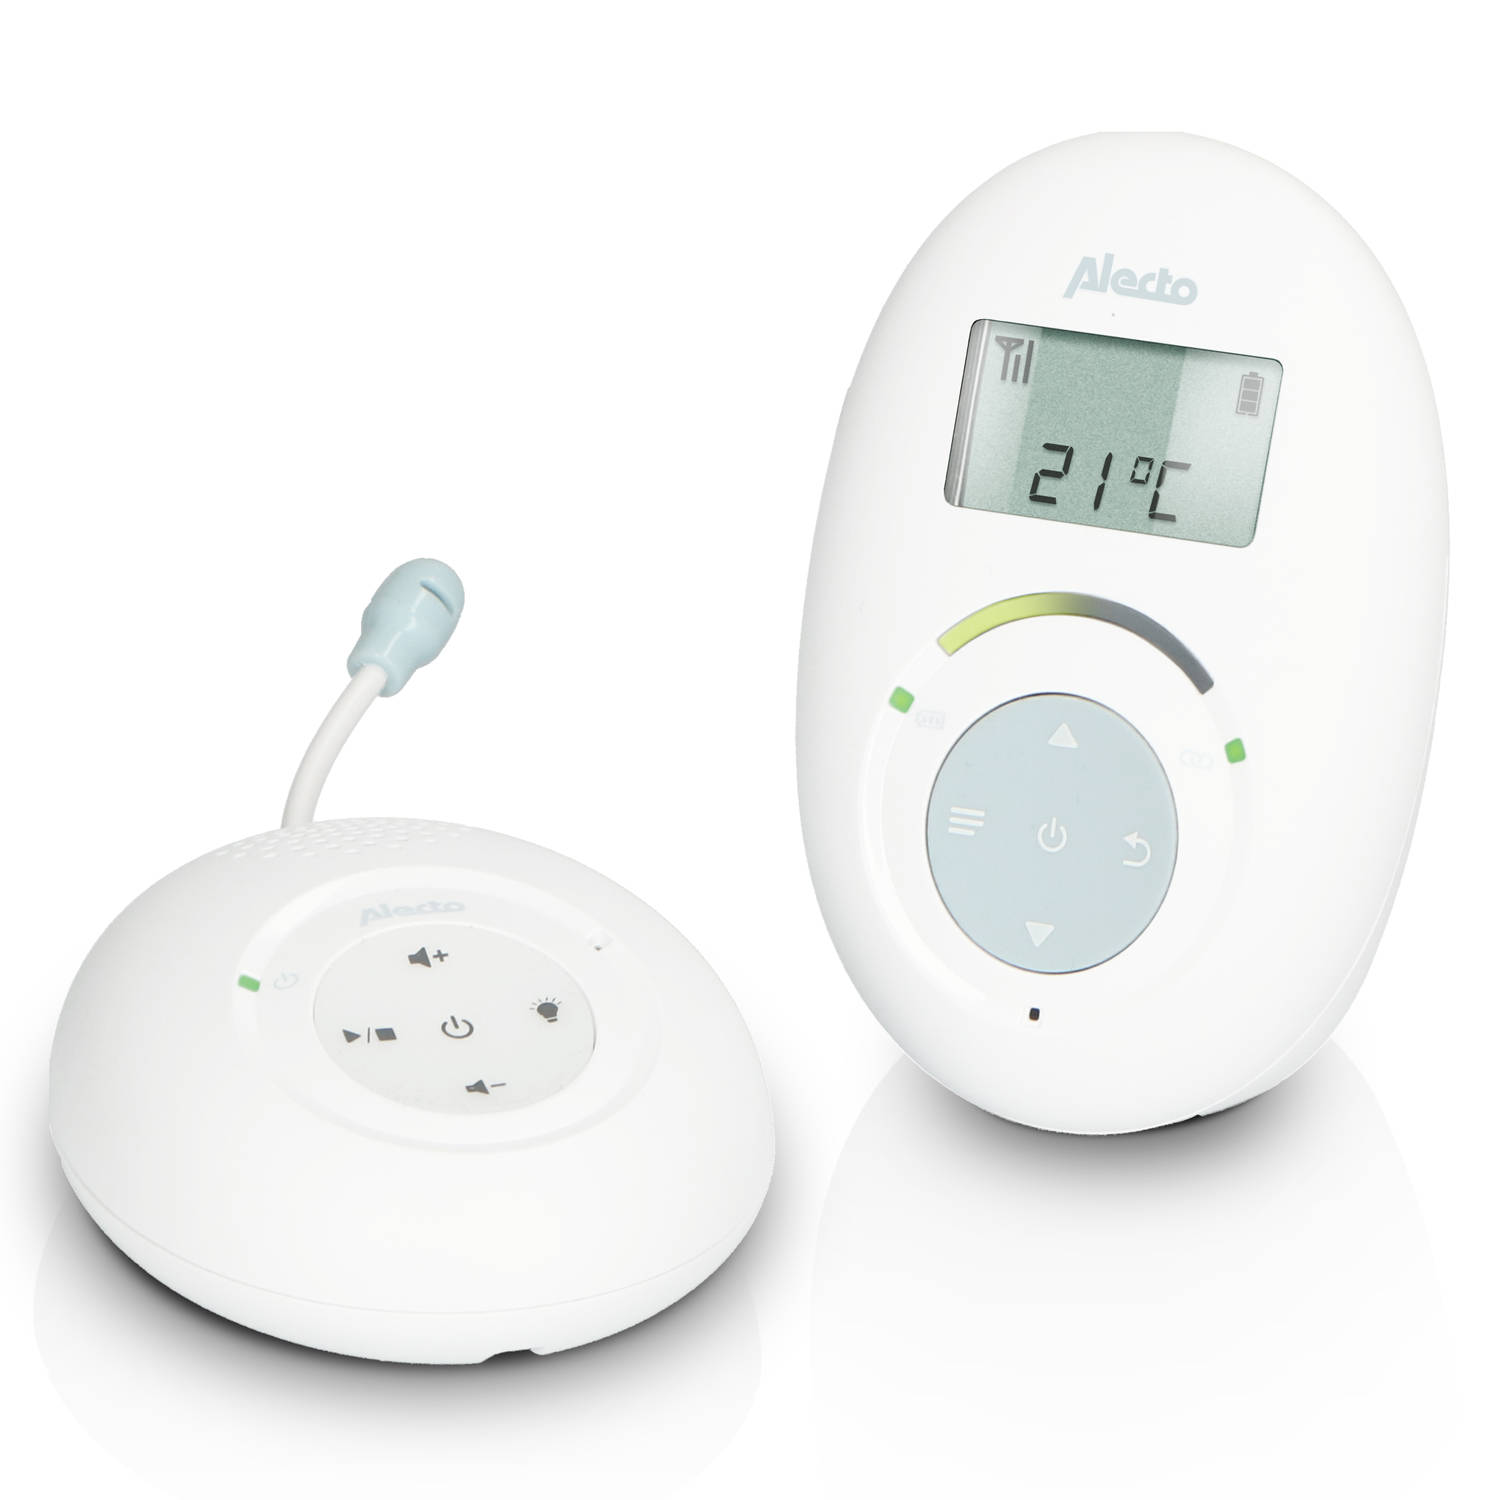 Full Eco DECT babyfoon Alecto DBX120 Wit-Blauw